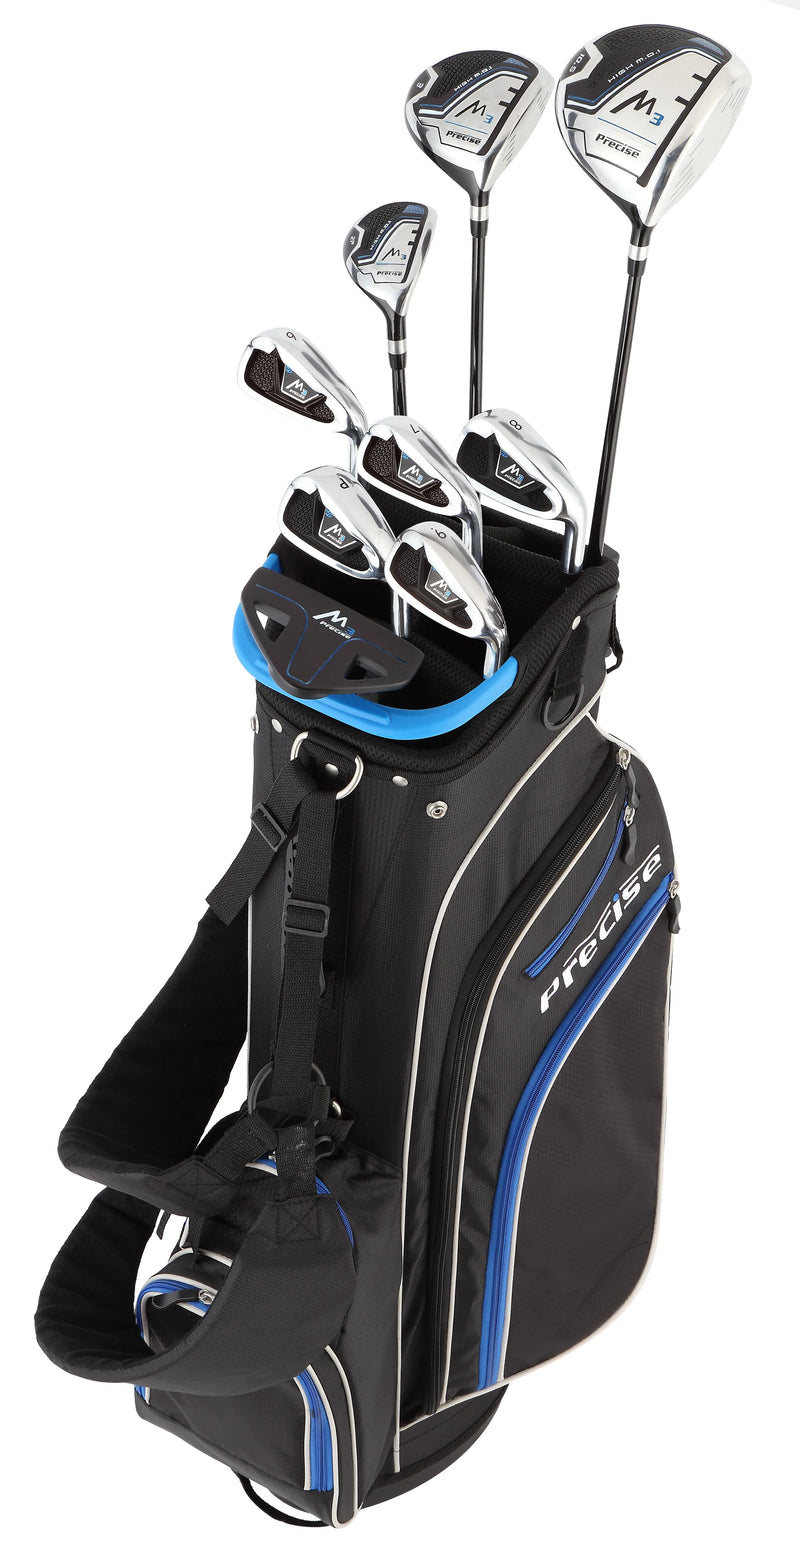 Load image into Gallery viewer, Precise M3 14 Piece Mens Tall Size Golf Set Blue
